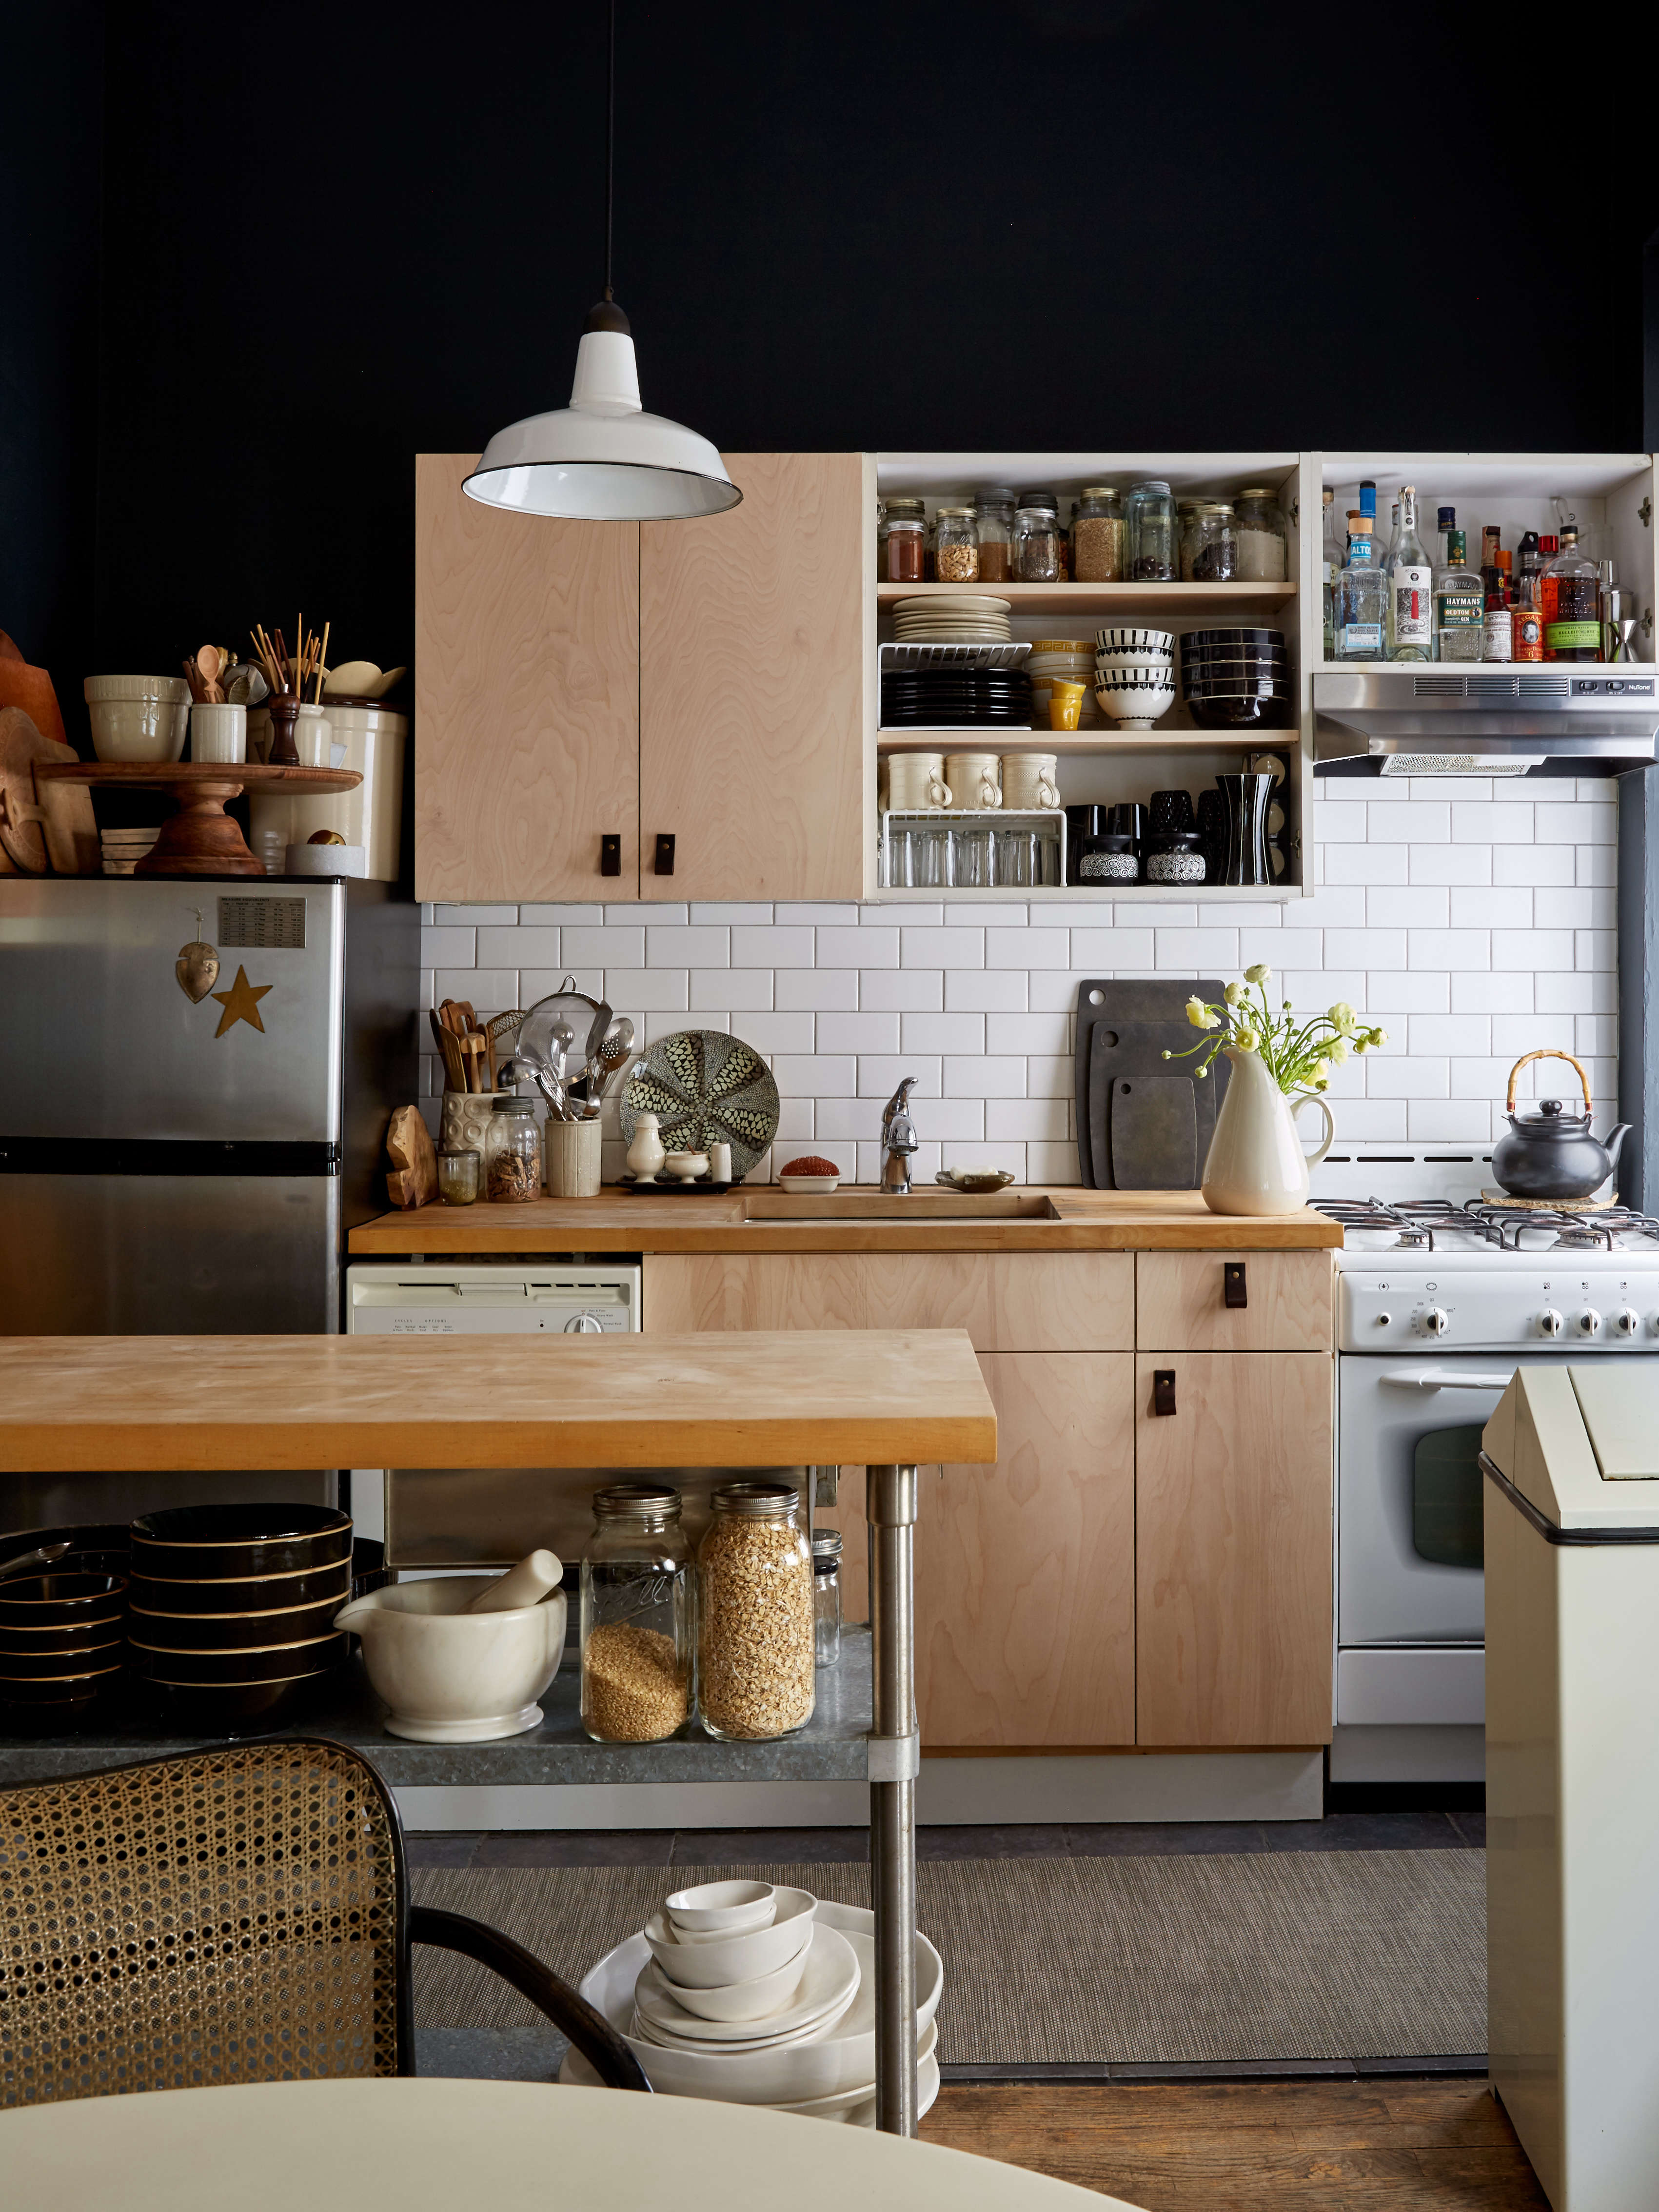 Small-Space Solutions: 17 Affordable Tips from an NYC Creative Couple -  Remodelista